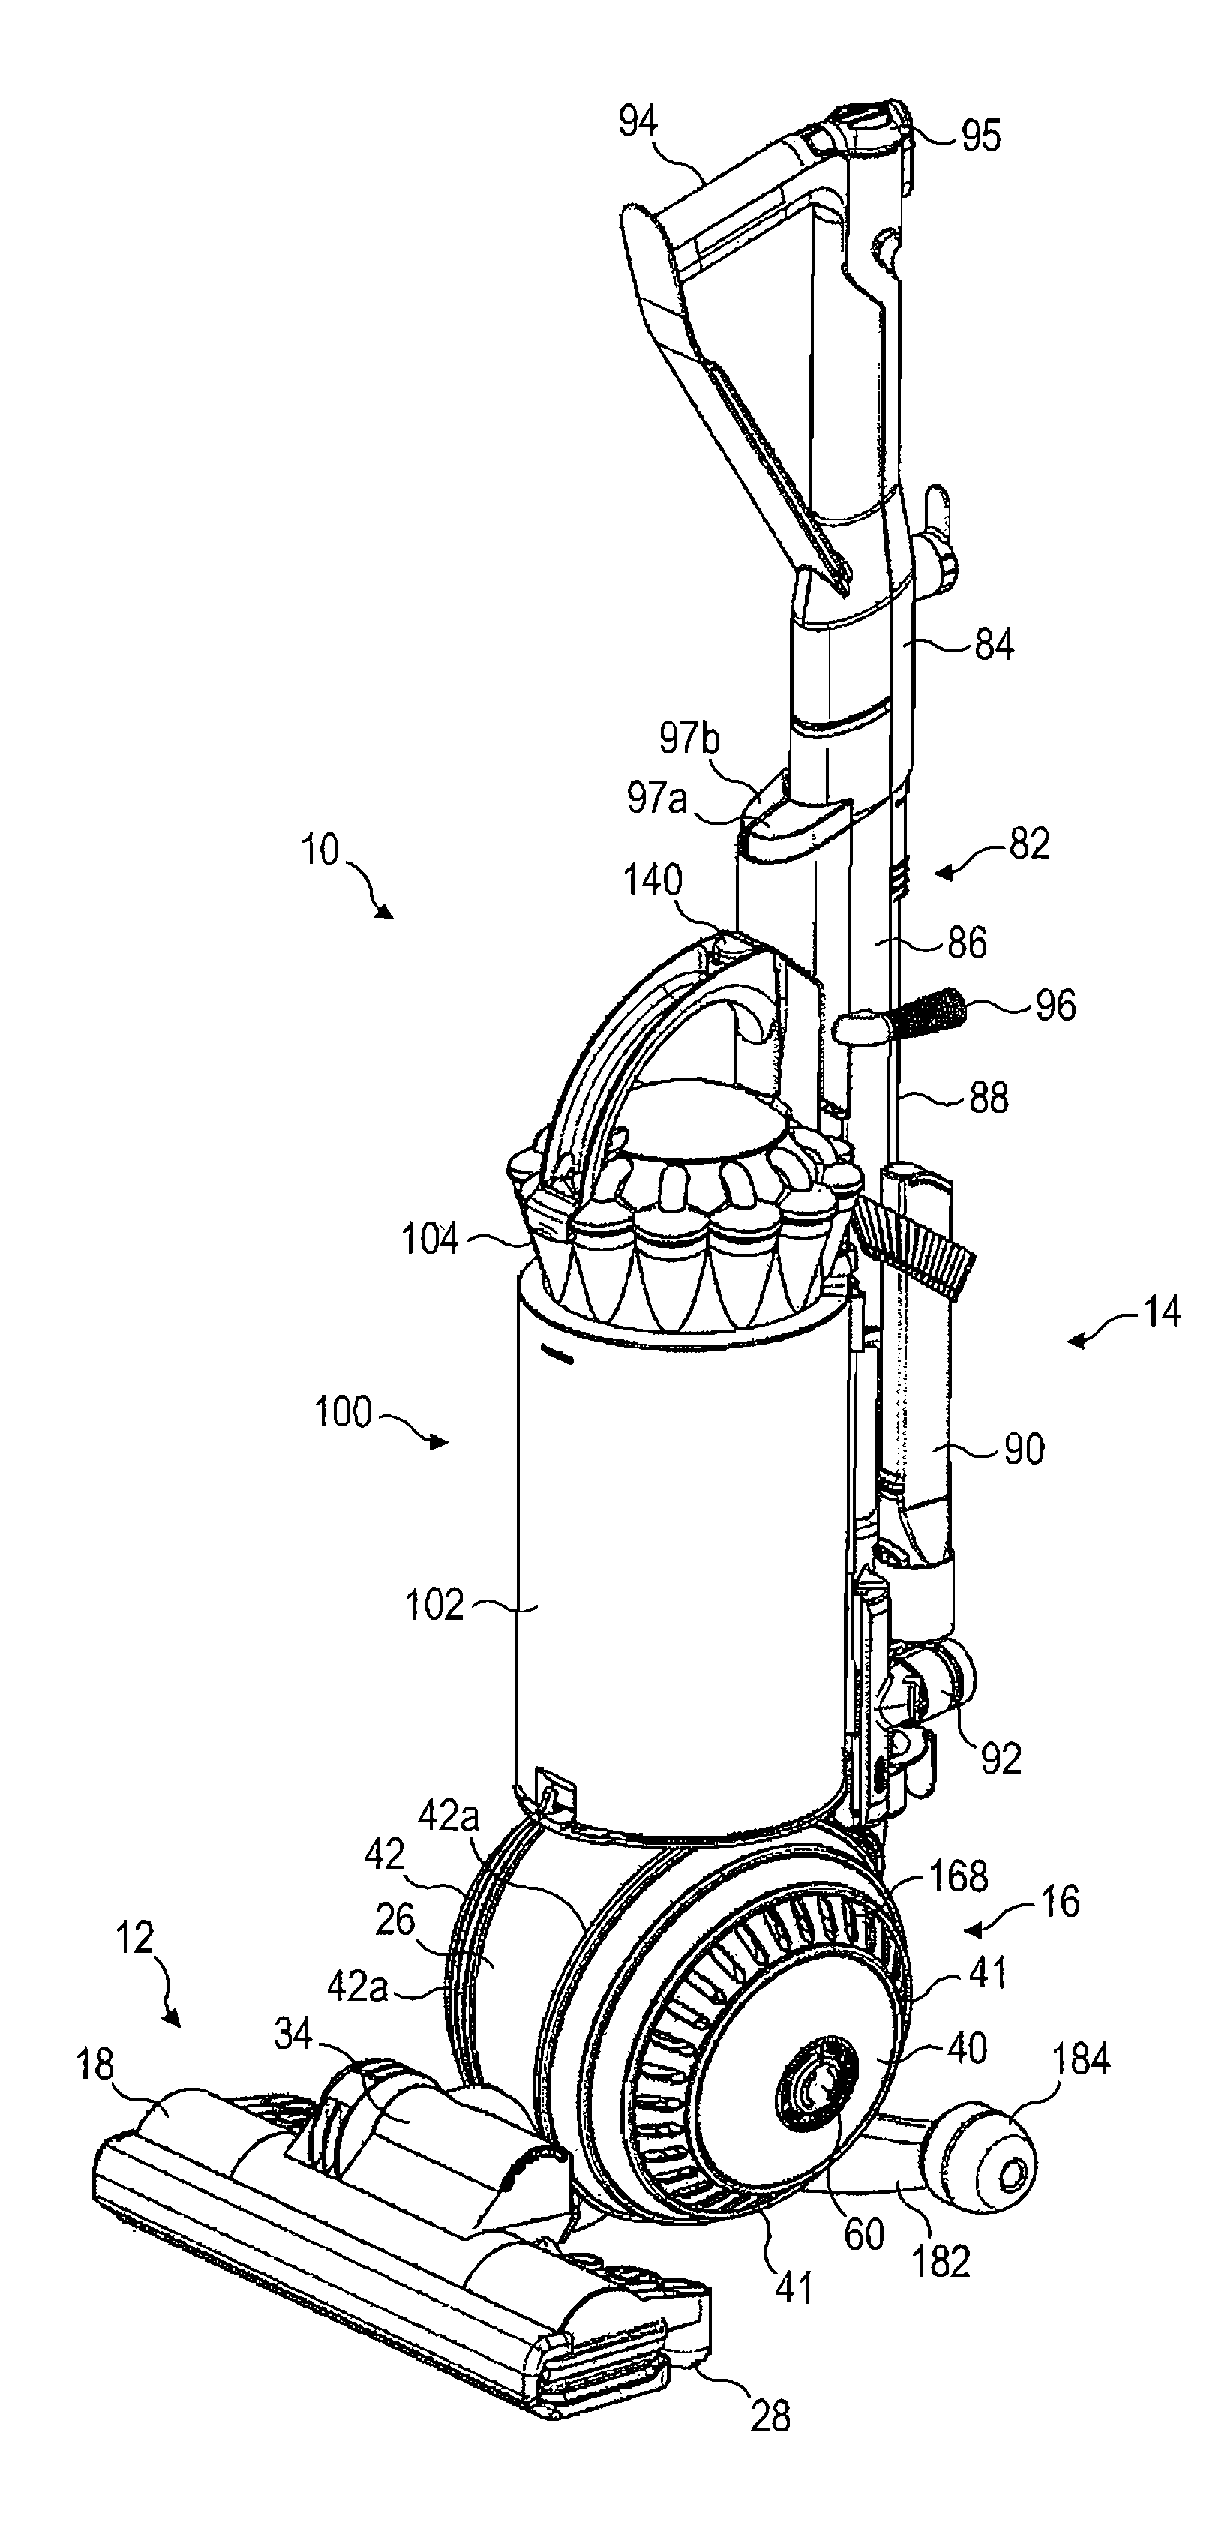 Surface treating appliance